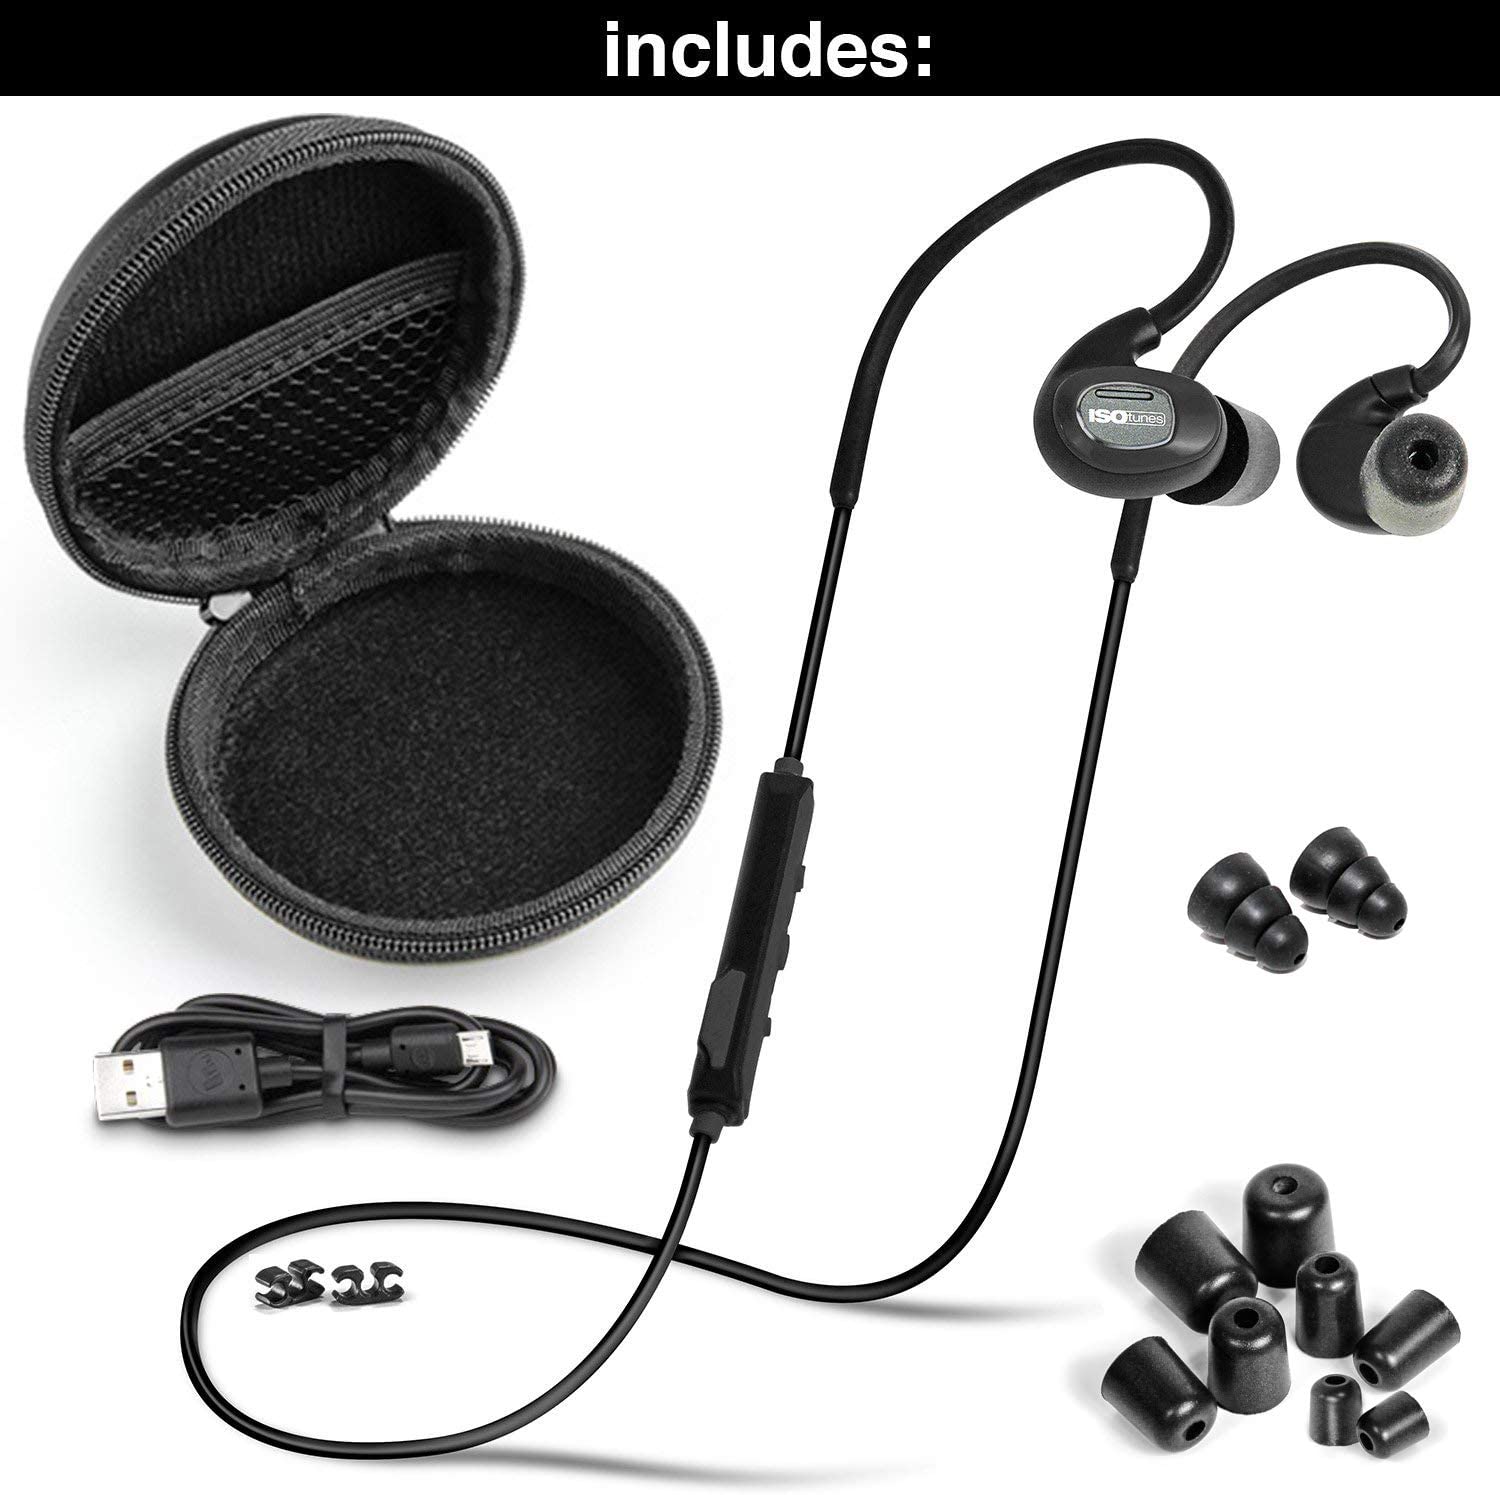 ISOtunes PRO Bluetooth Industrial Hearing Protection Headphones - NRR 27 dB Personal Protective Equipment - Cleanflow